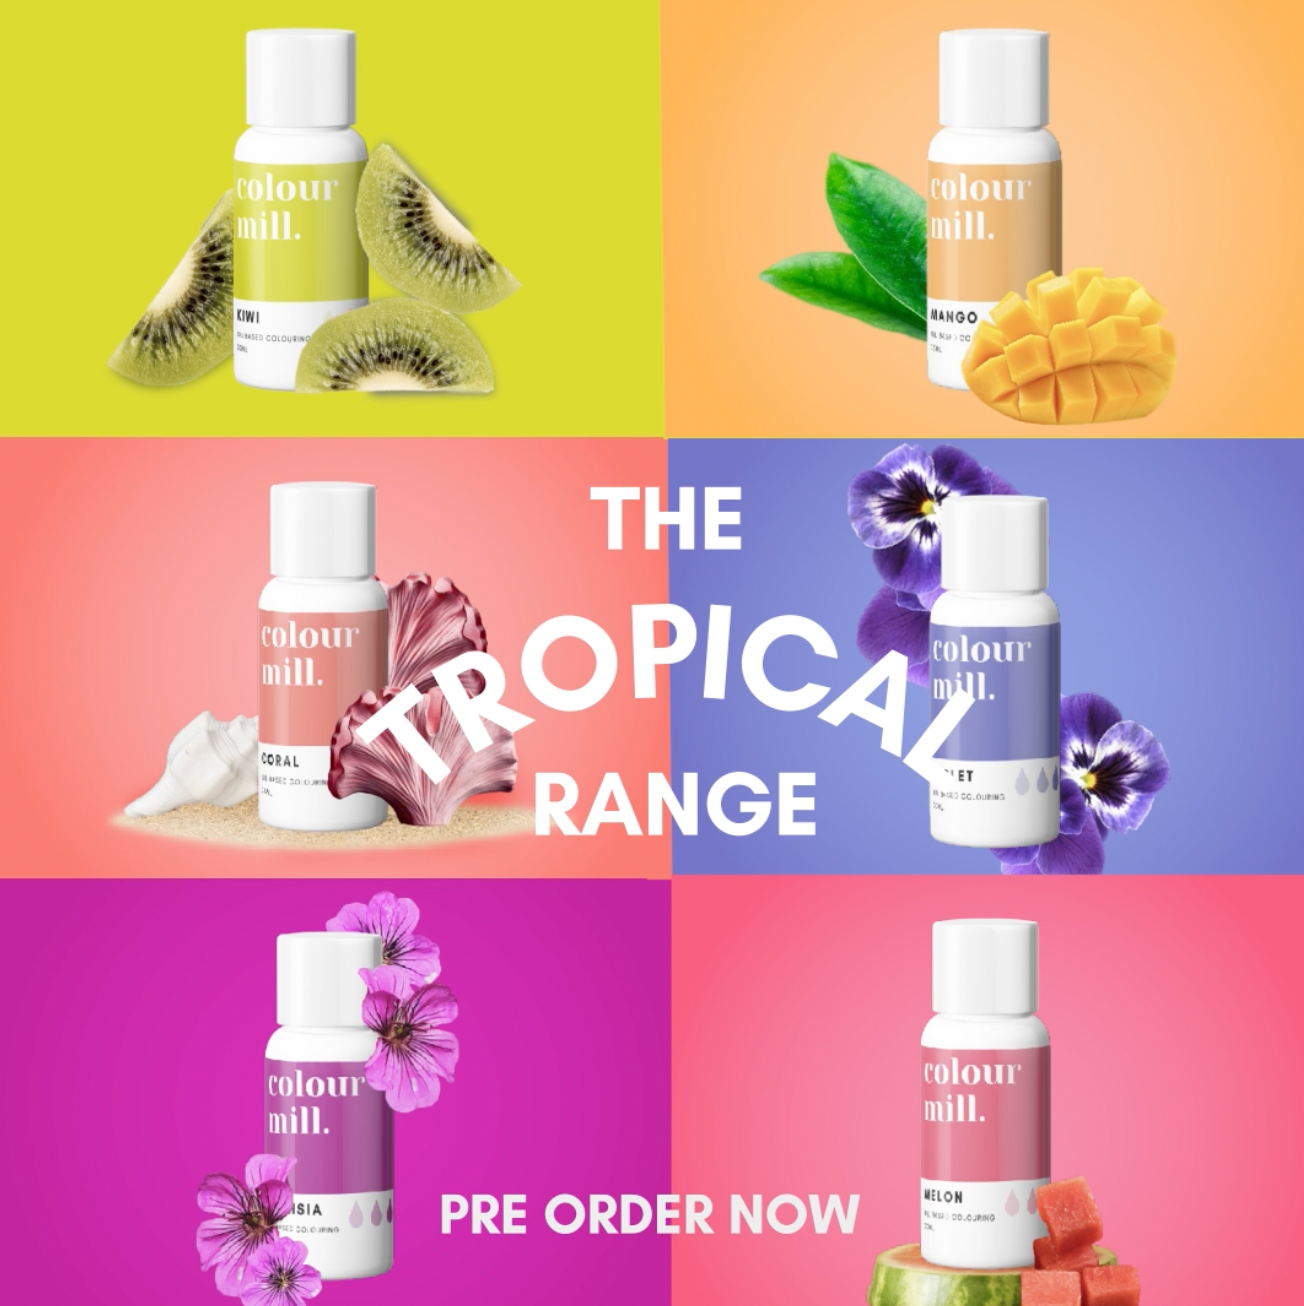 *NEW* Tropical Colour Mill Oil Based Food Colouring - 20ml Bottles